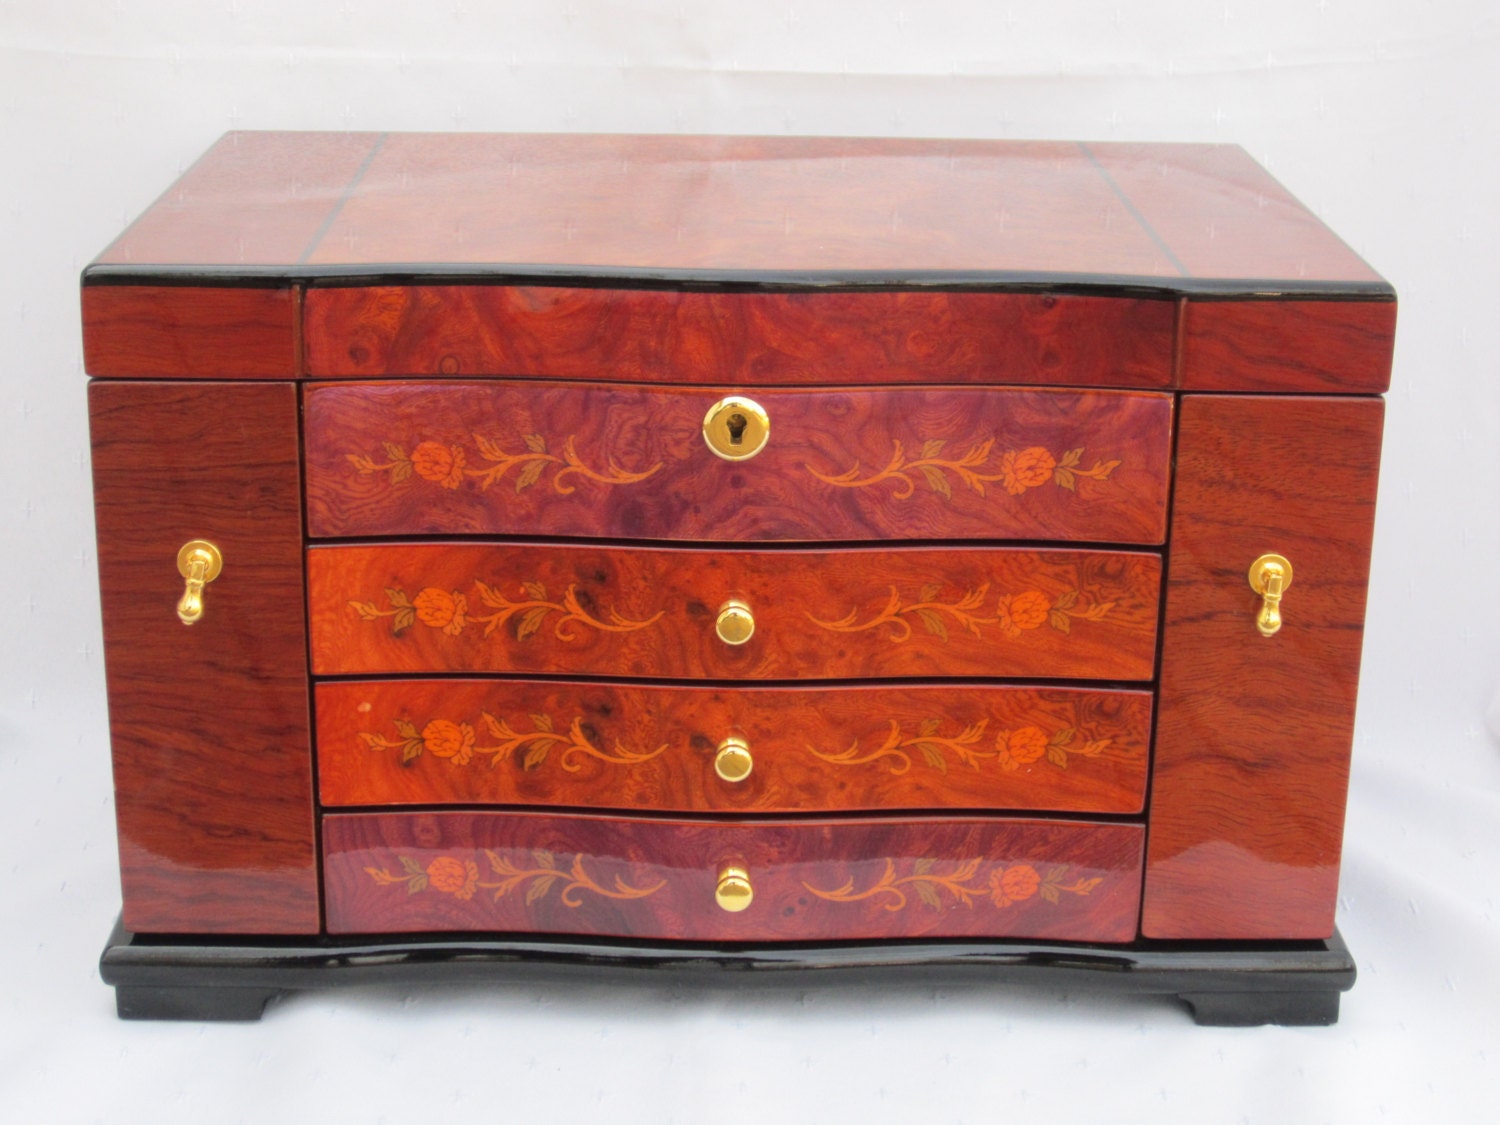 Reserved for W.....Large Wood Jewelry Box Lacquer Finish High